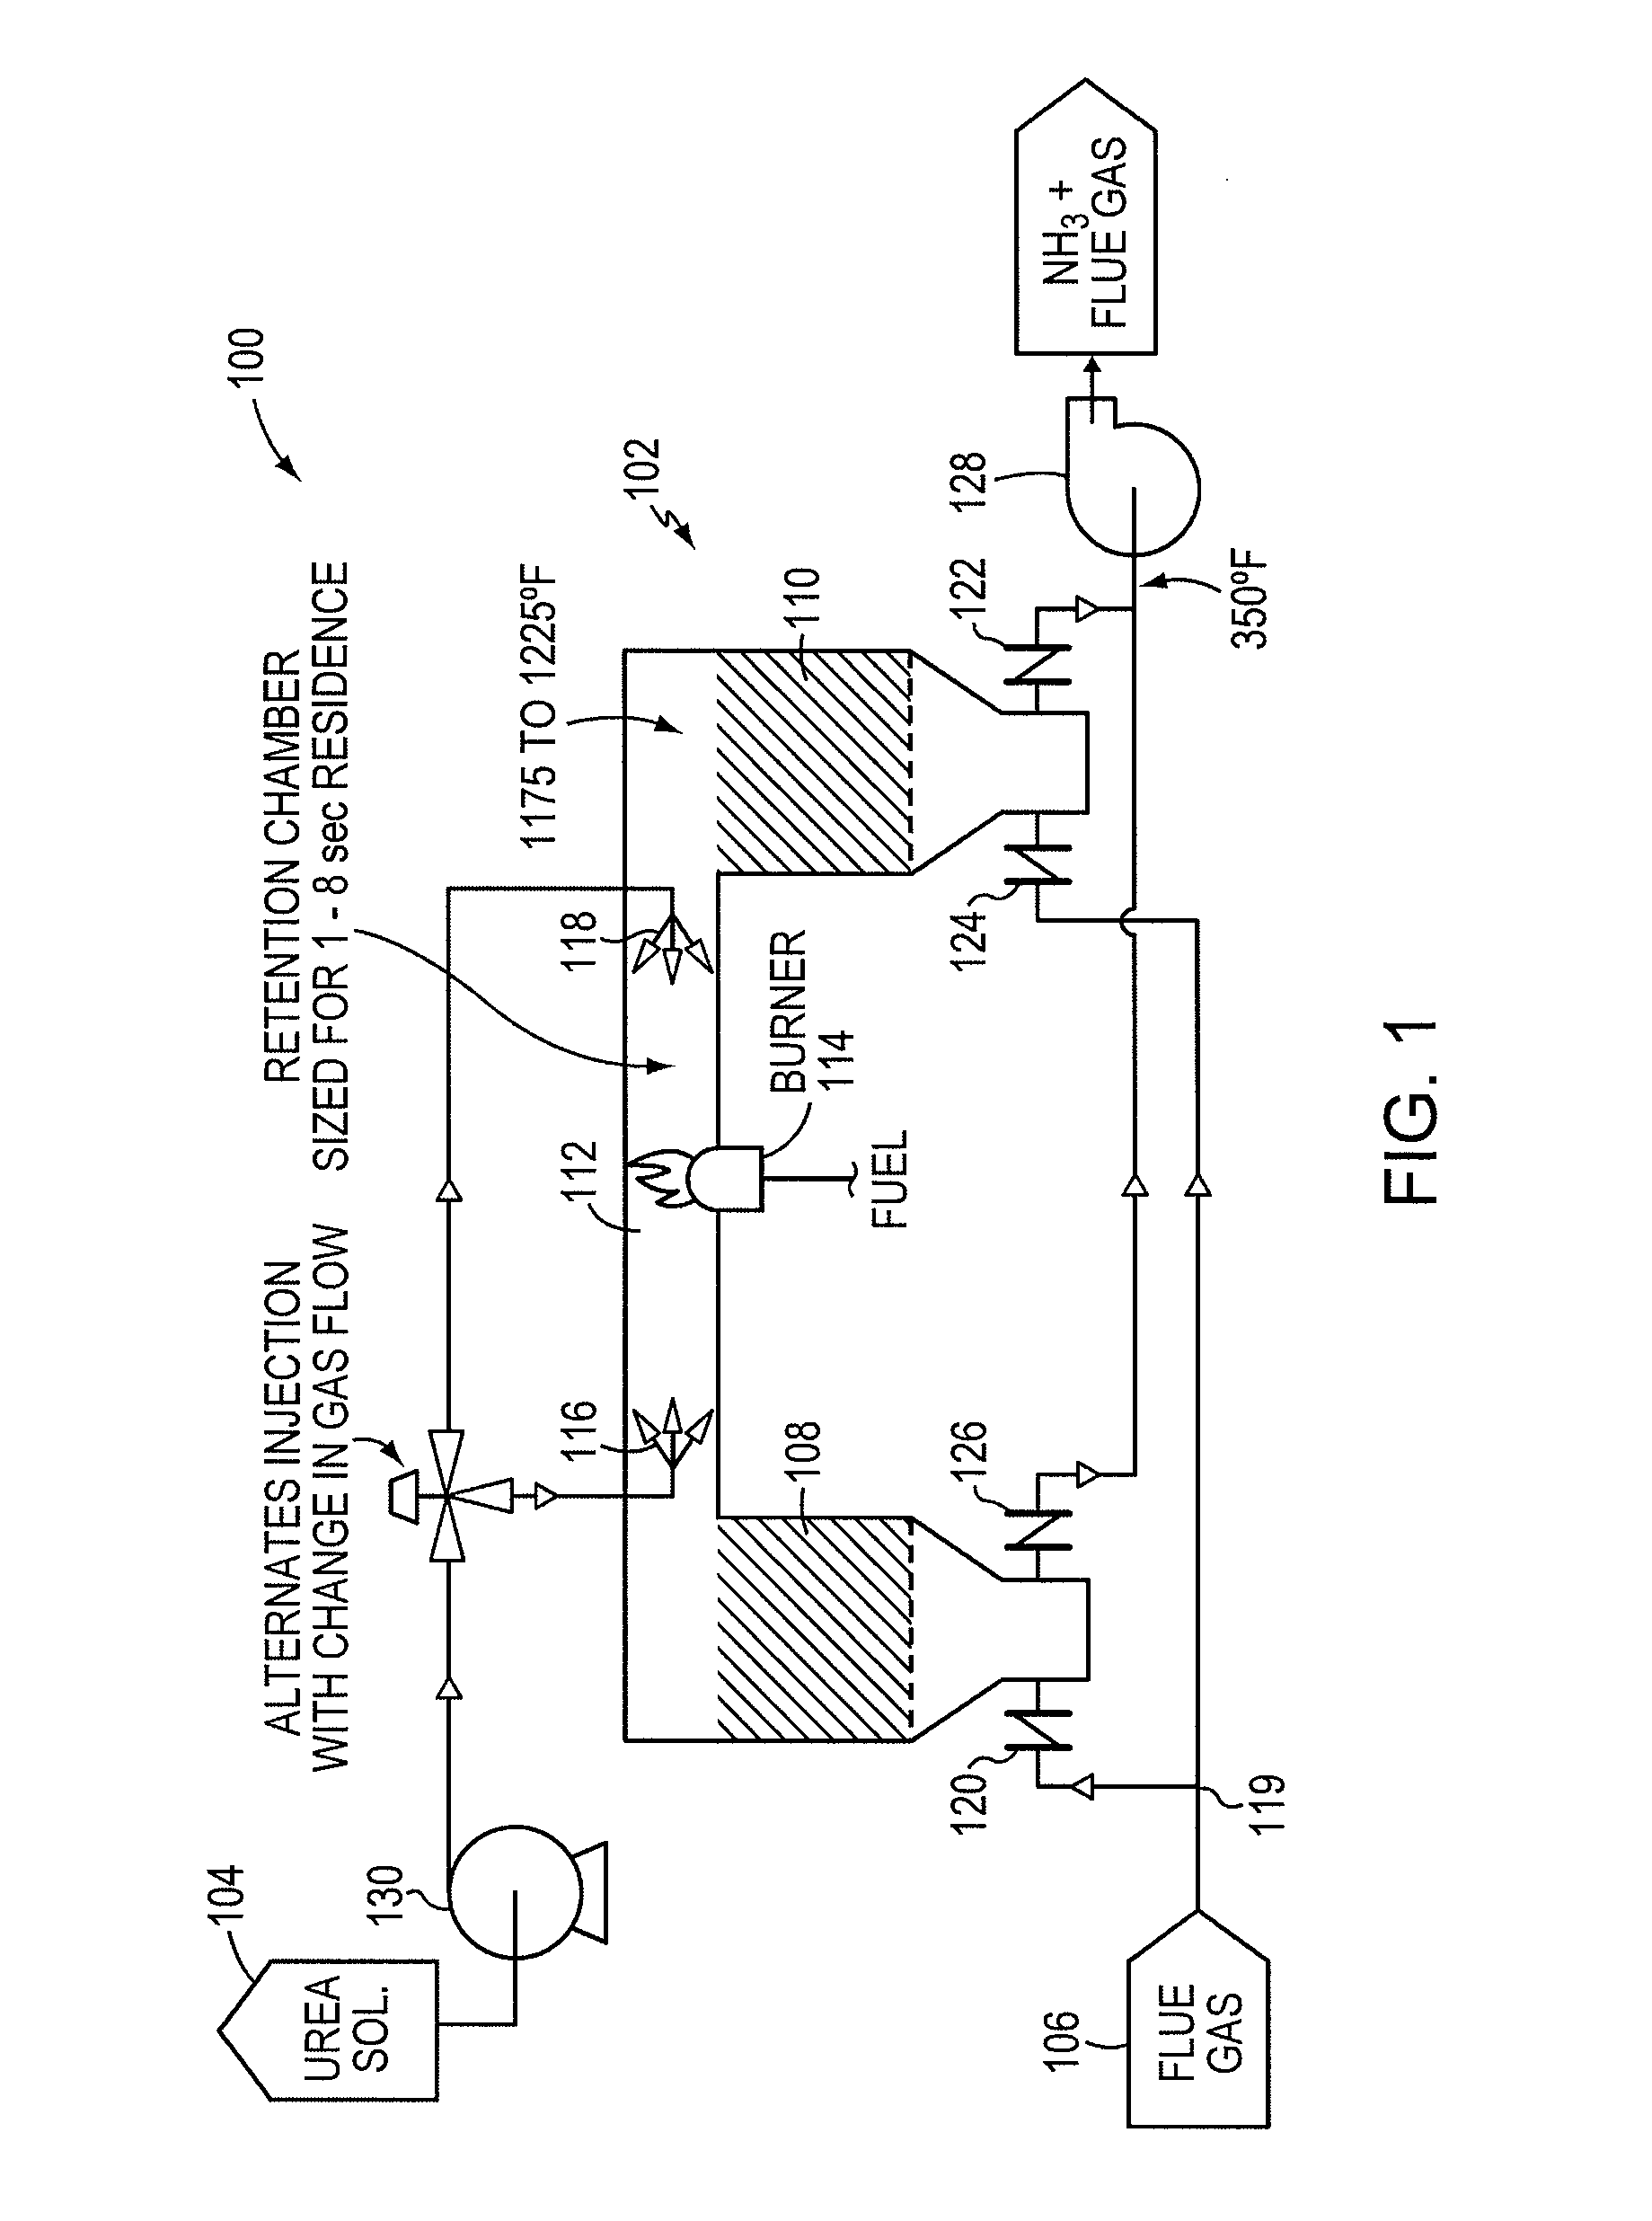 Thermal Decomposition of Urea in a Side Stream of Combustion Flue Gas Using a Regenerative Heat Exchanger